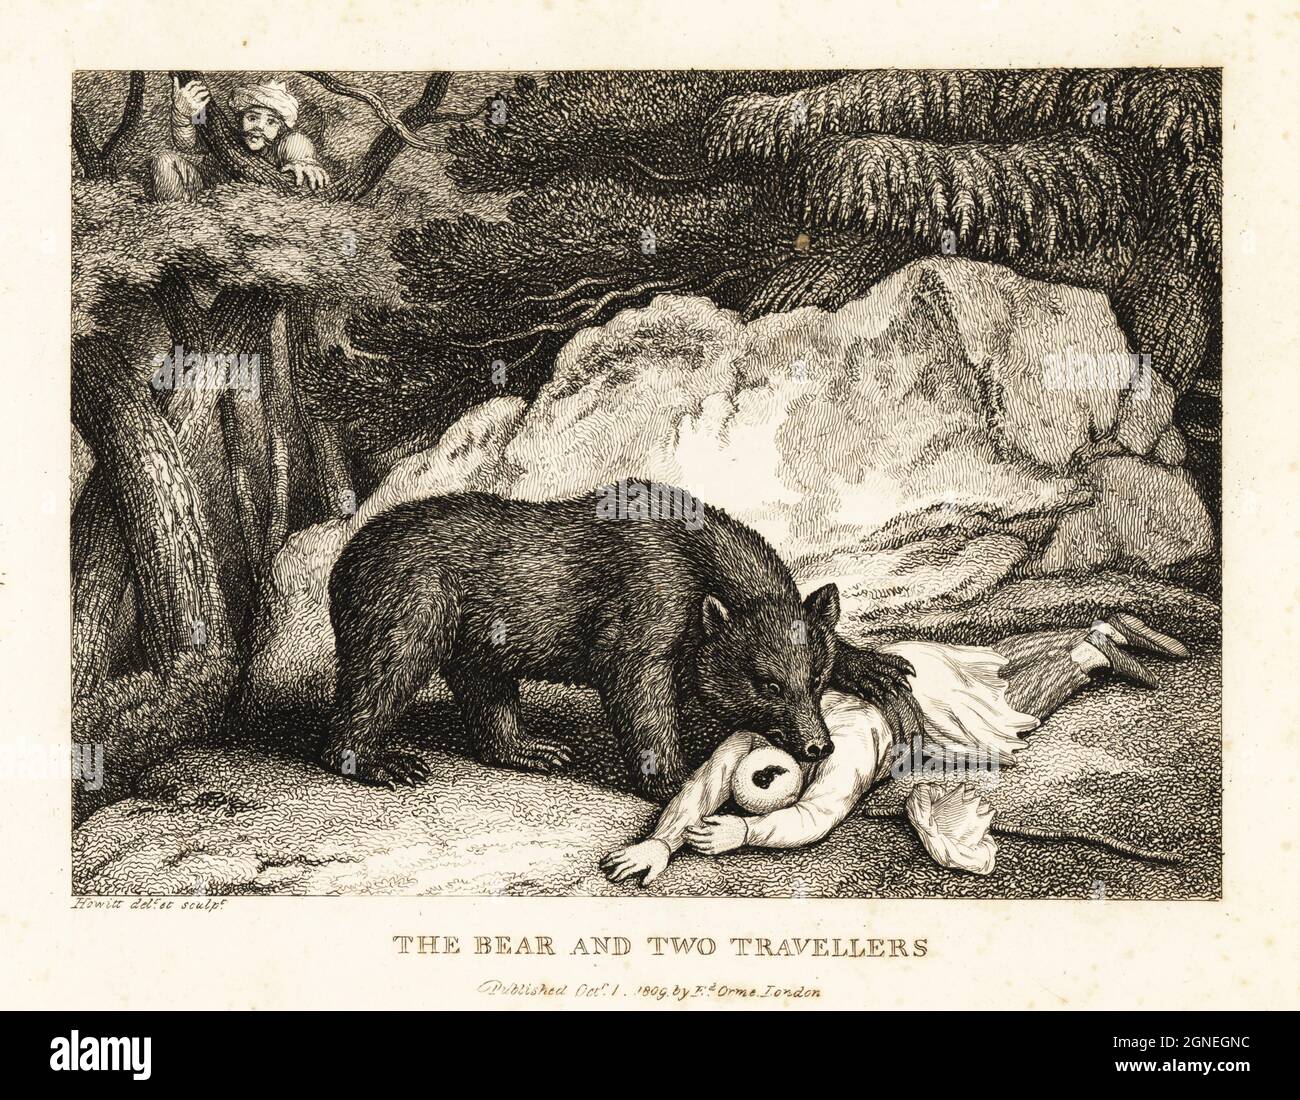 A traveller in turban plays dead while attacked by a bear. Another traveller hides in a tree. The bear the two travellers. Illustration of a fable by Greek author Aesop. Copperplate etching drawn and engraved from life by Samuel Howitt from his own A New Work of Animals, Principally Designed from the Fables of Aesop, Gay and Phaedrus, Edward Orme, London, 1811. Stock Photo